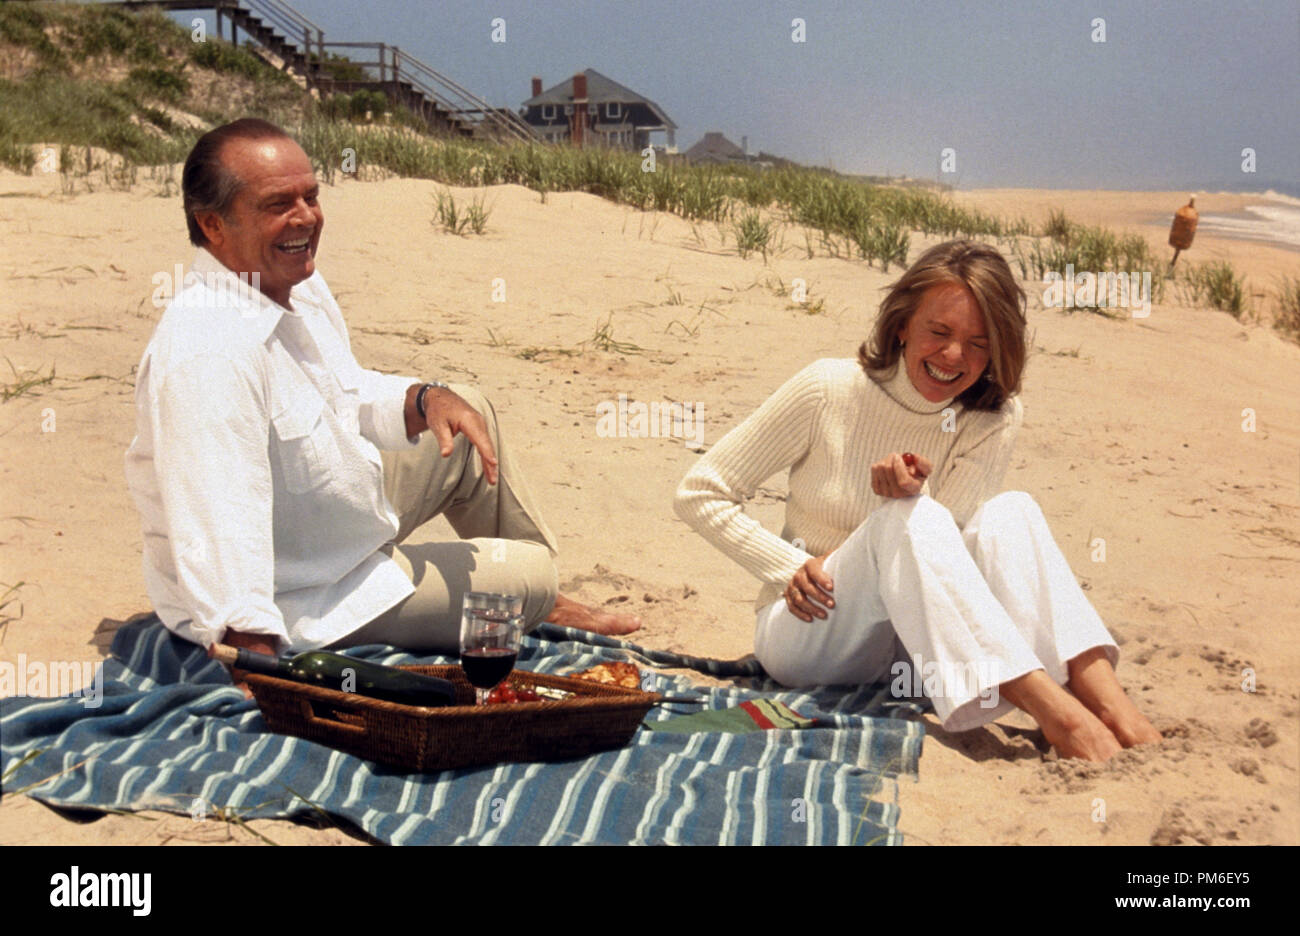 Film Still / Publicity Still from 'Something's Gotta Give'  Jack Nicholson, Diane Keaton  © 2003 Columbia Pictures File Reference # 30753426THA  For Editorial Use Only -  All Rights Reserved Stock Photo